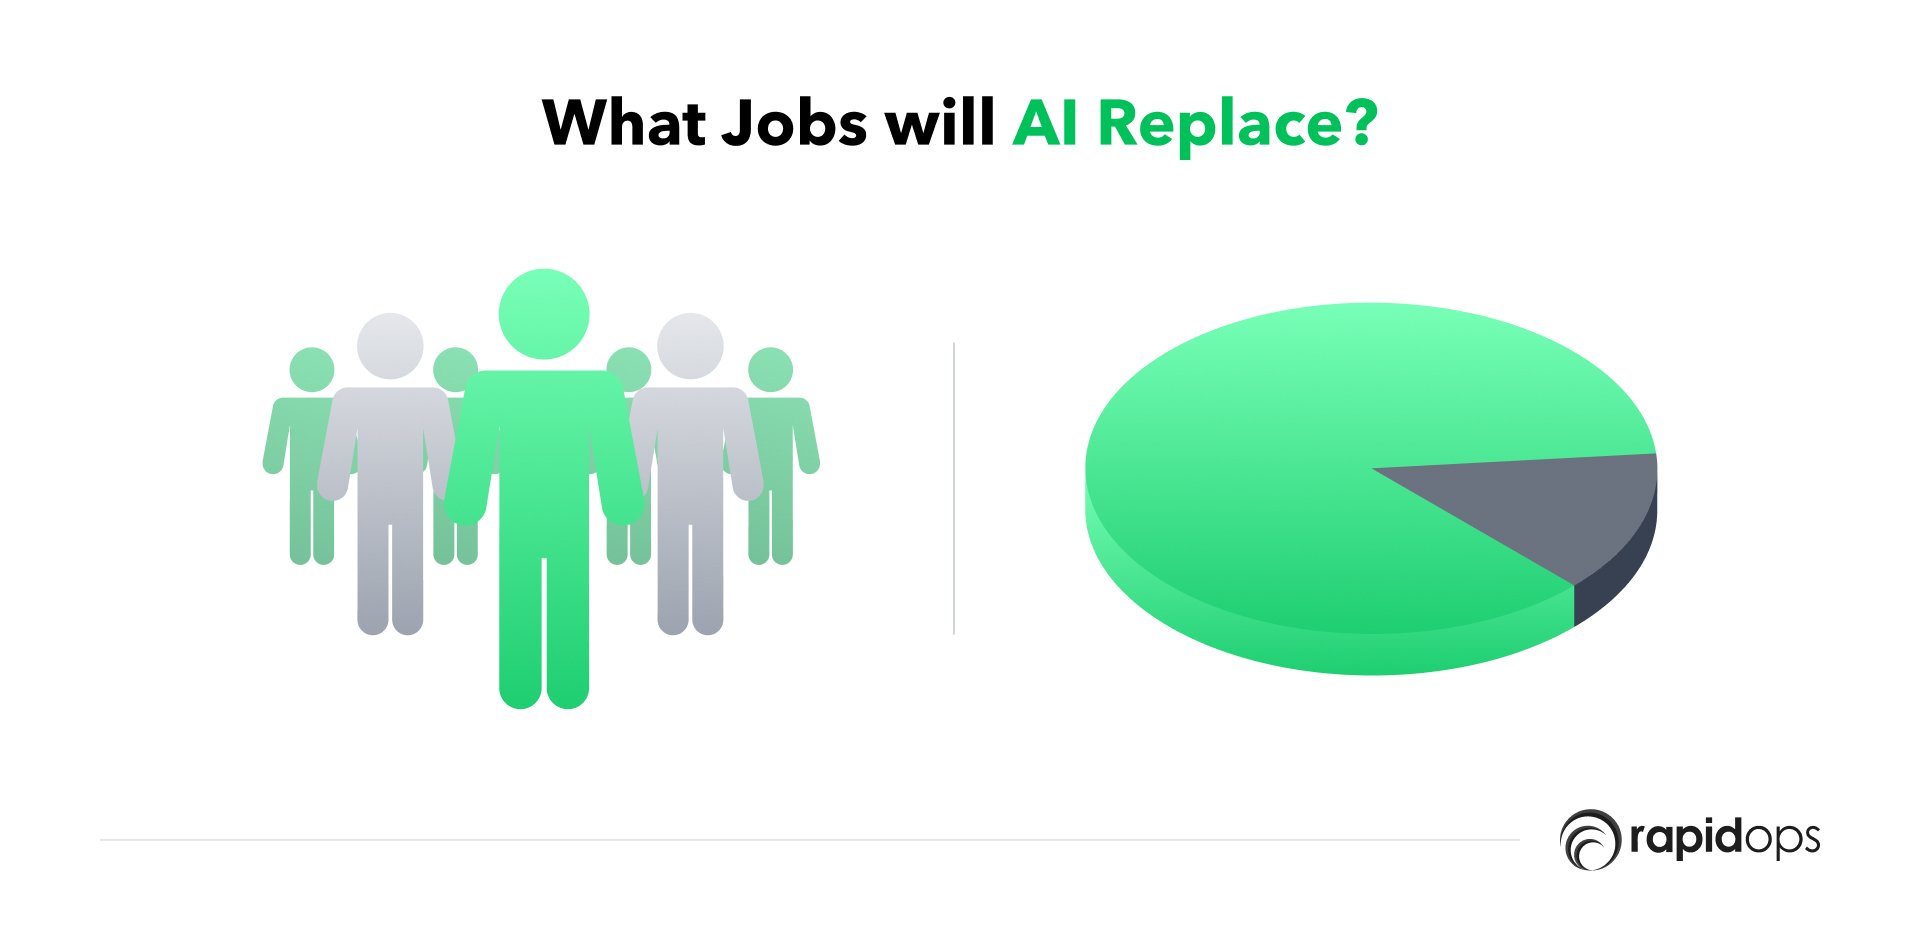 What Jobs will AI Replace